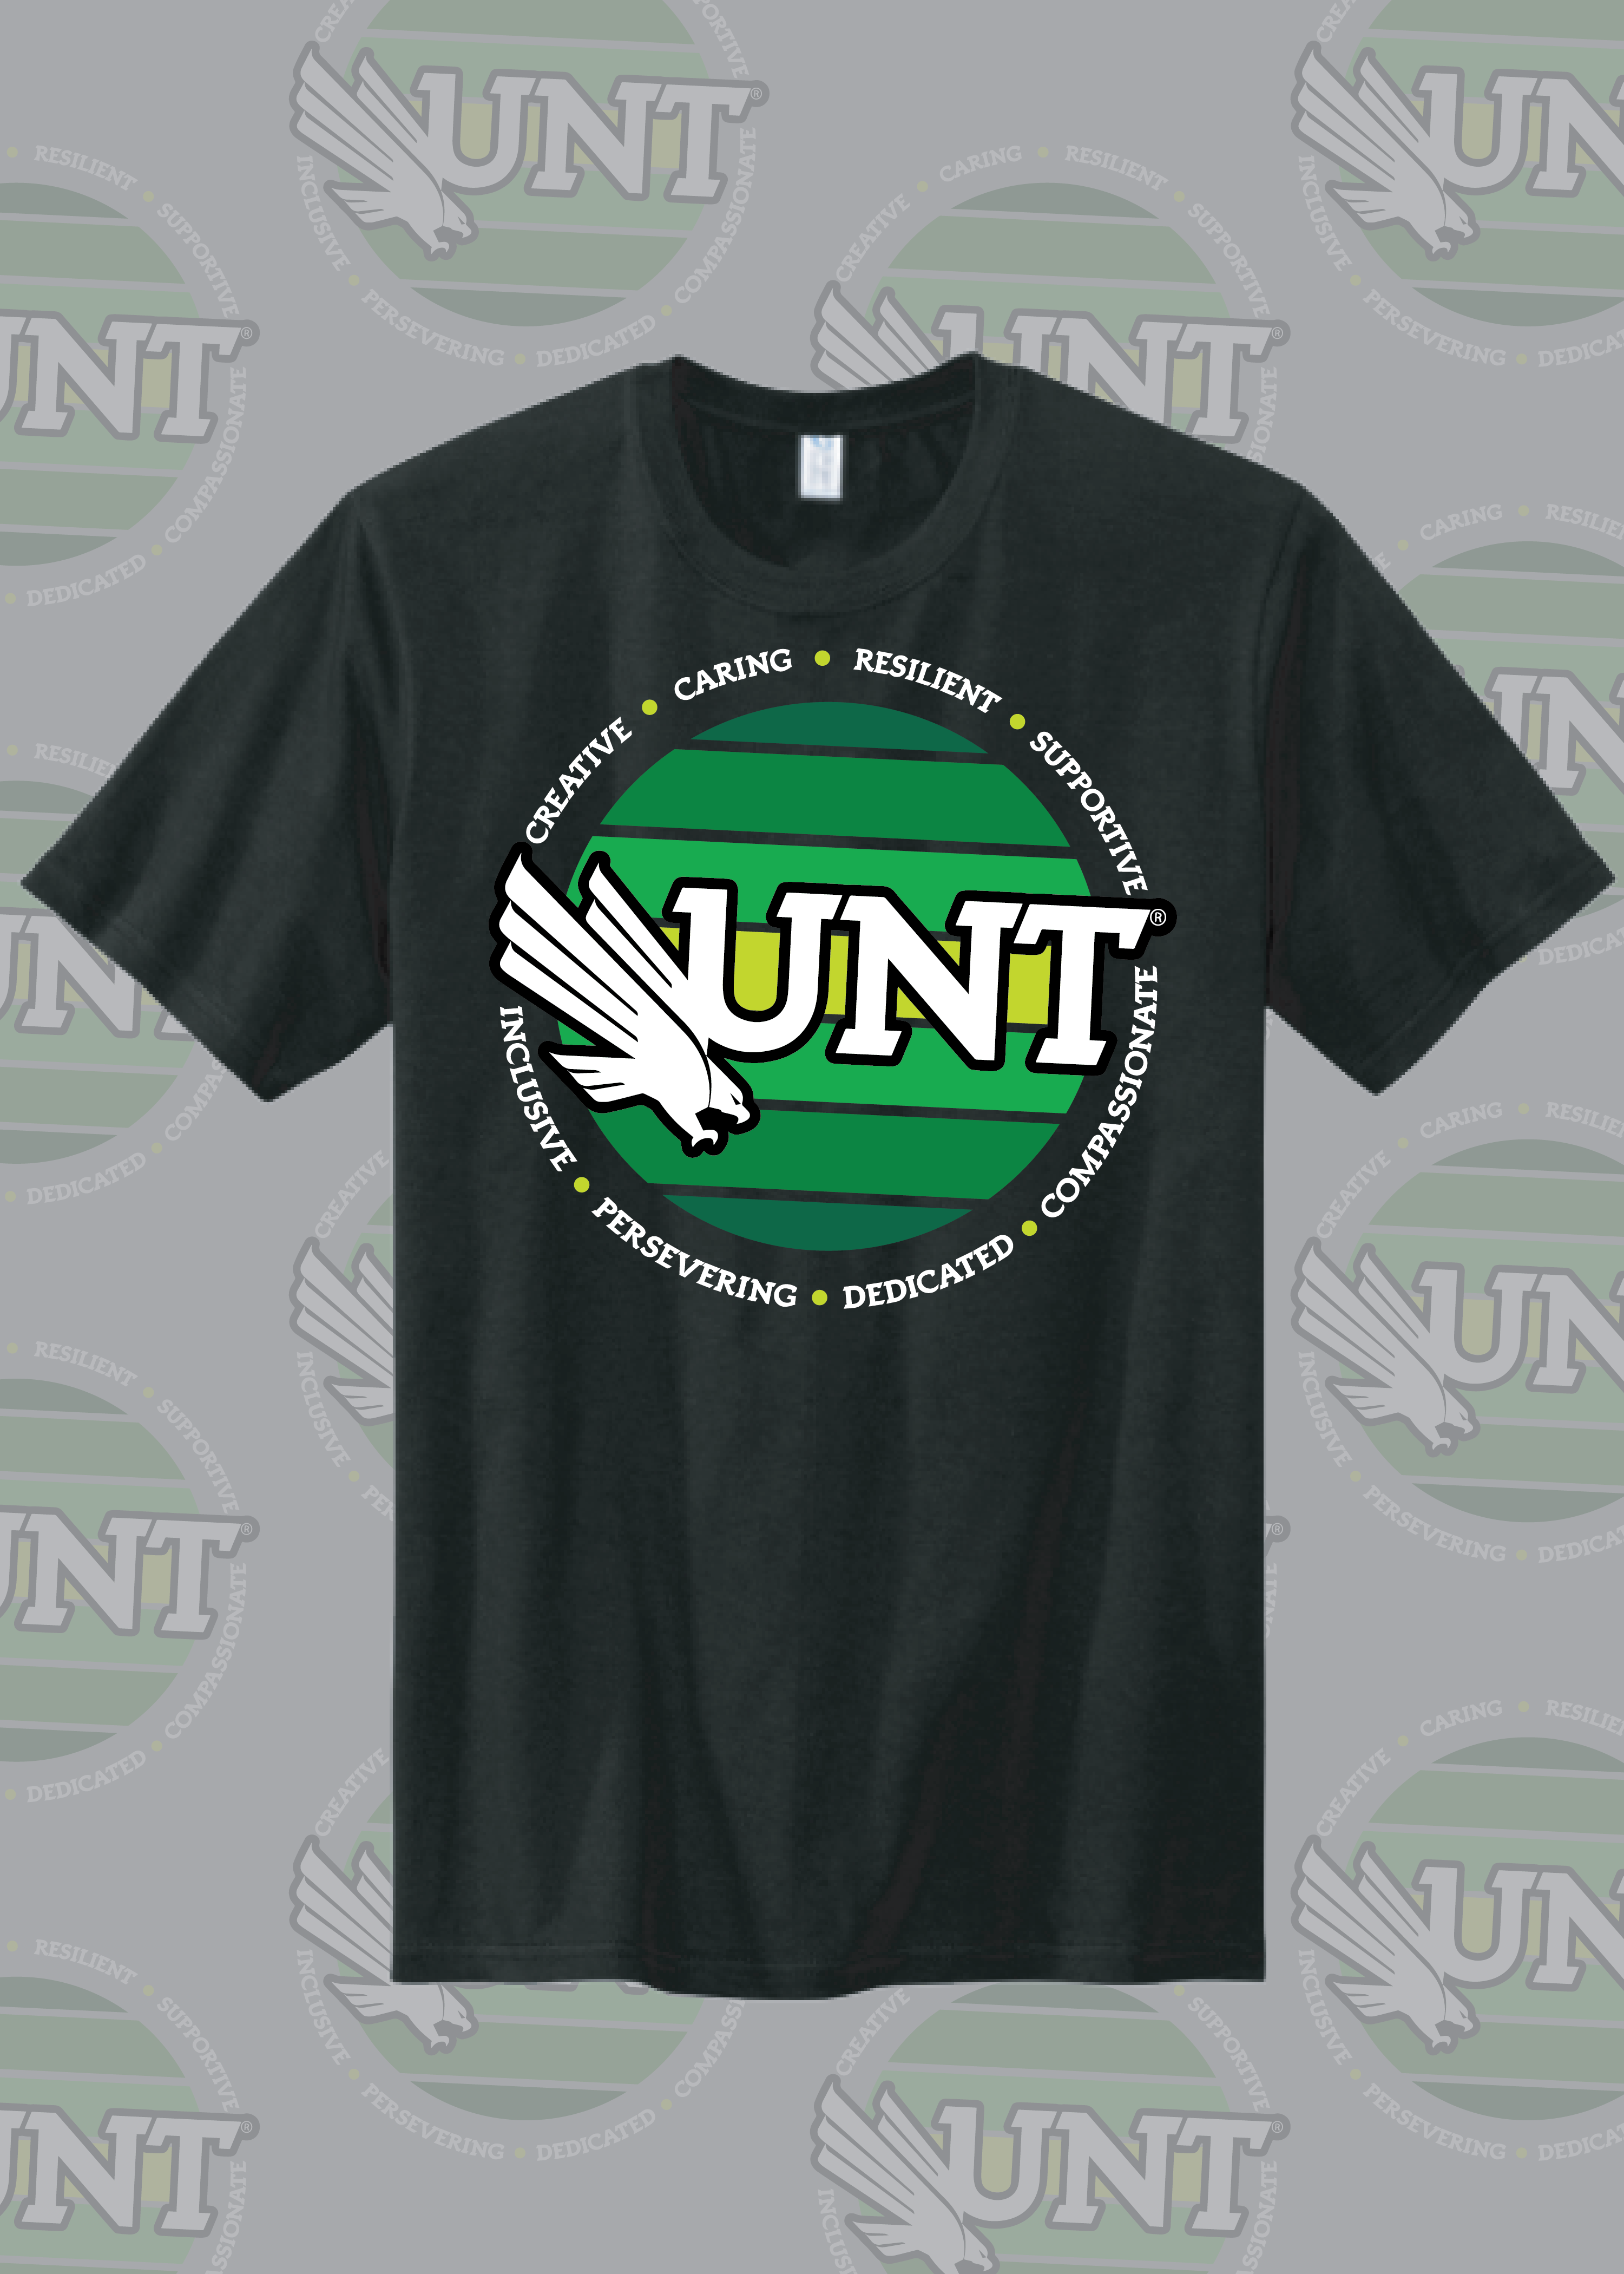 UNT Personality T-shirt - Small (S)